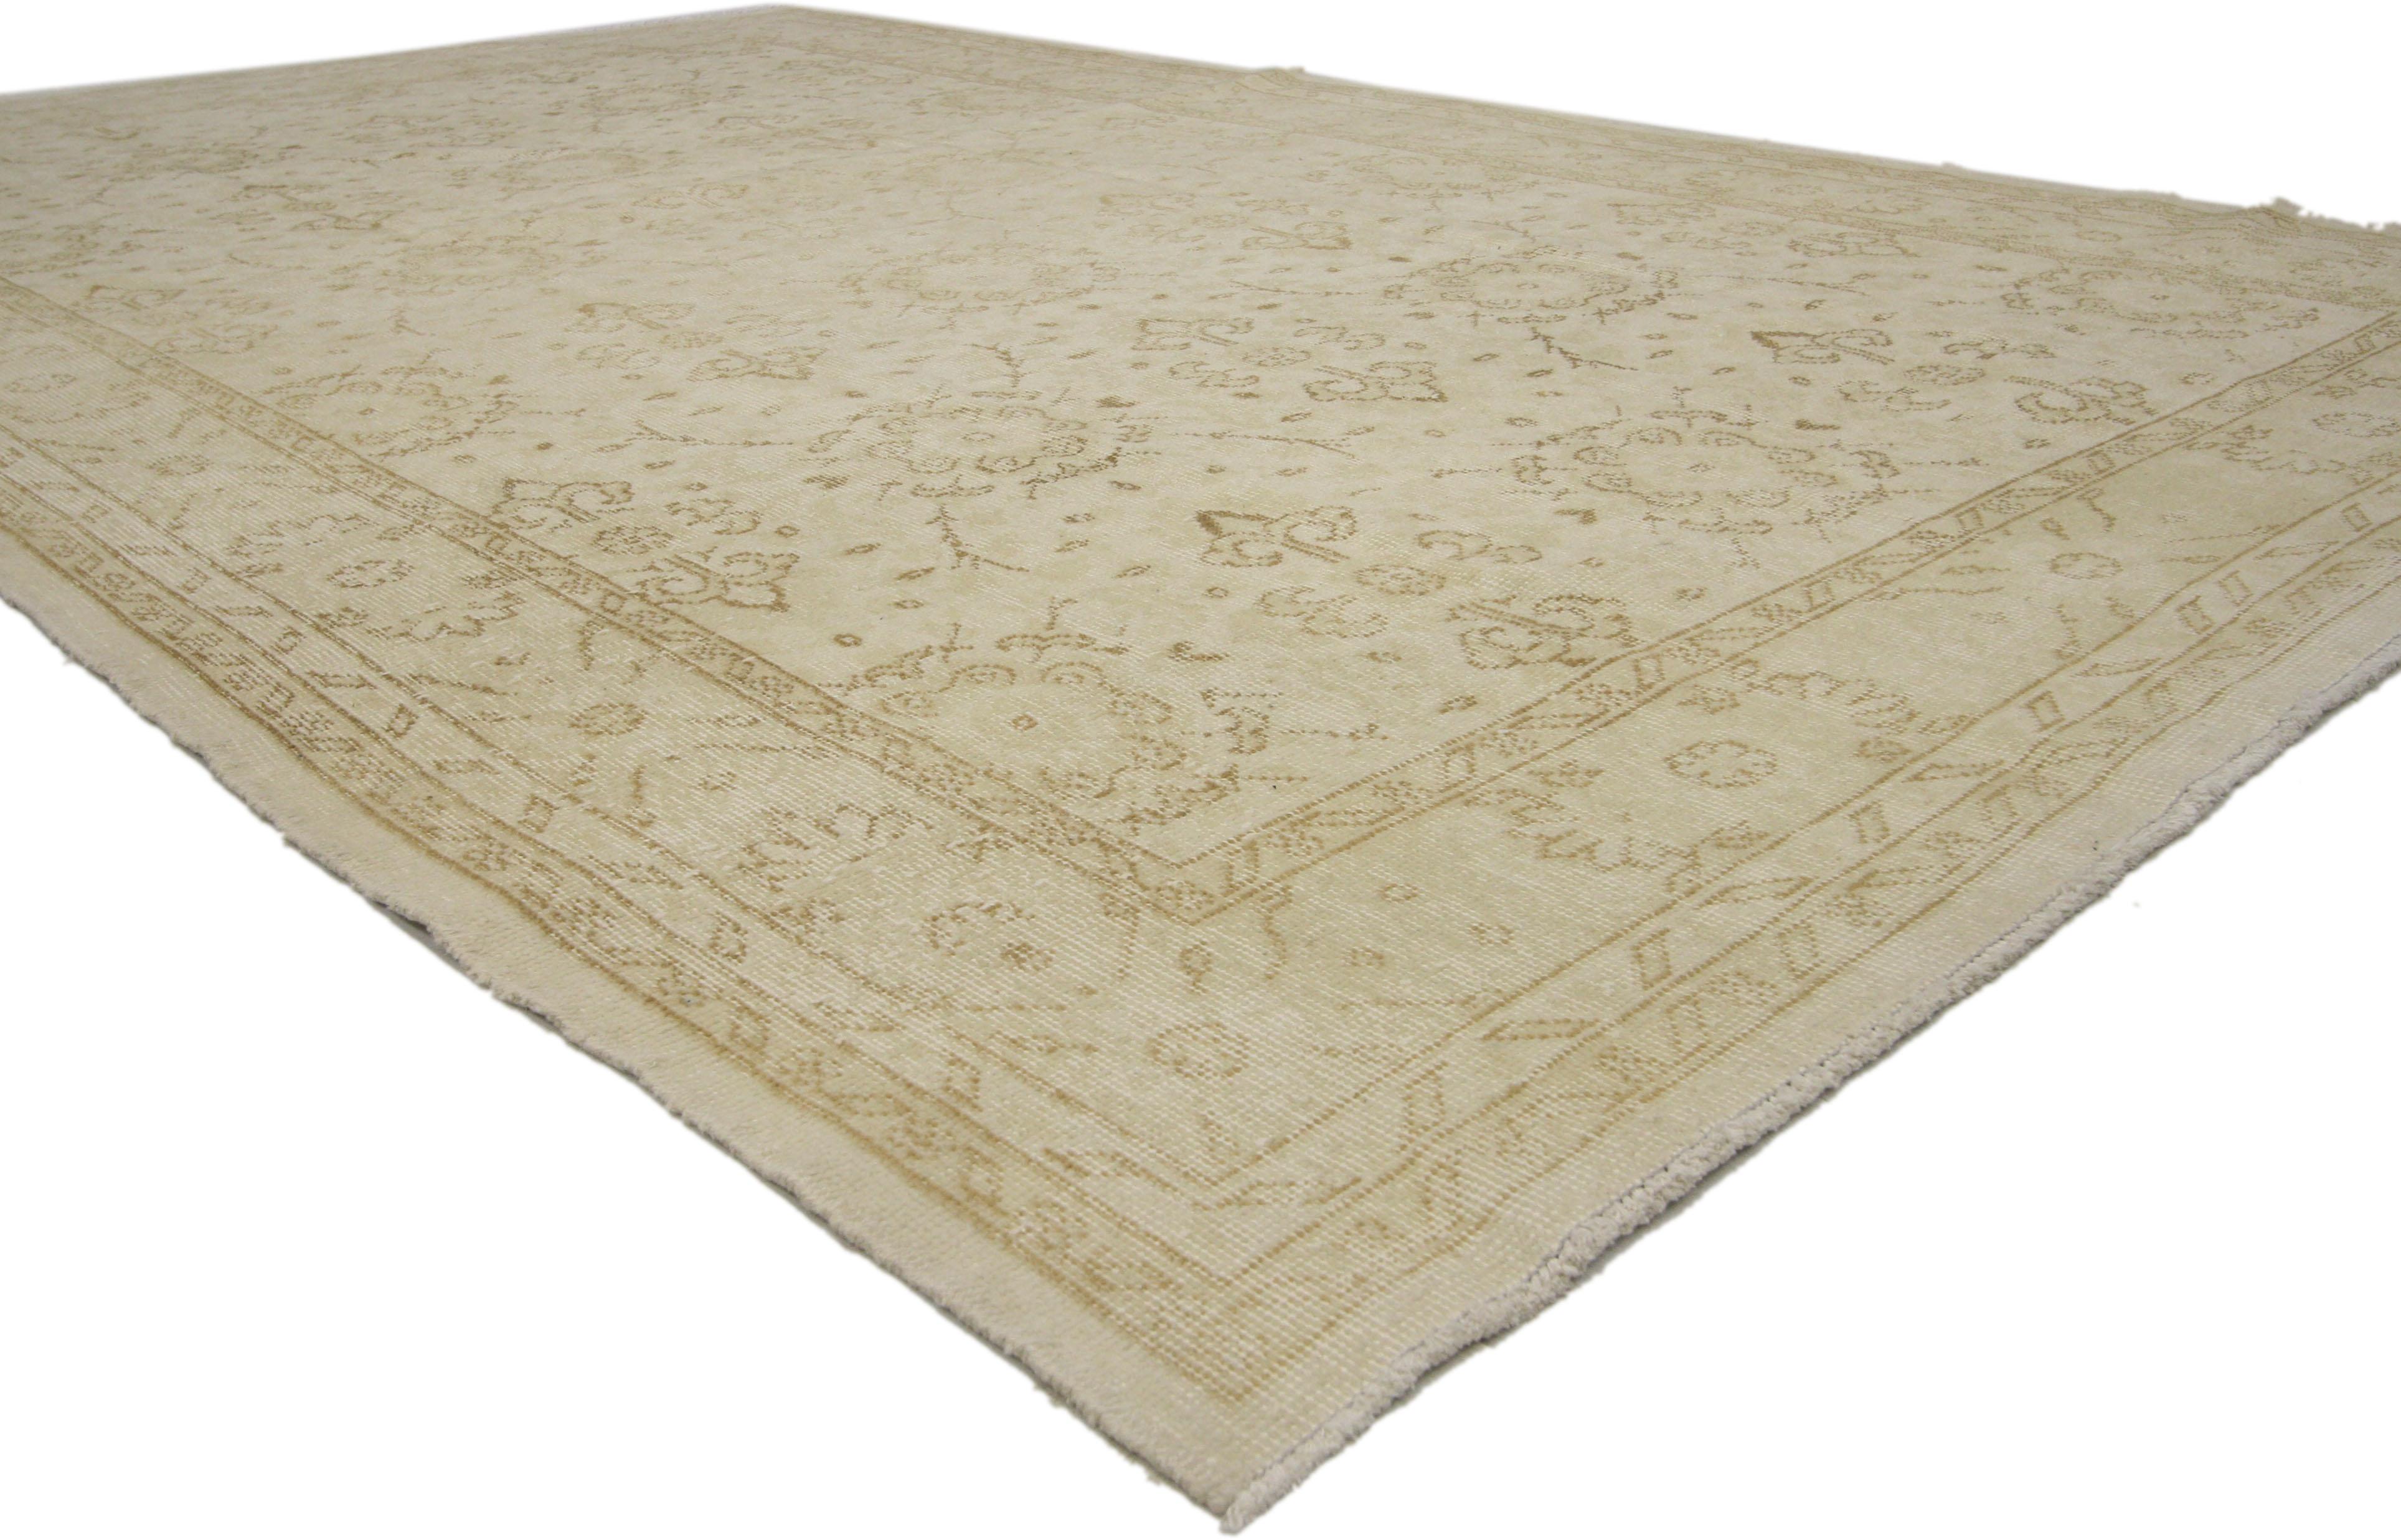 51105 Distressed Turkish Sivas Rug with Shabby Chic Shaker-Gustavian Farmhouse Style. Lovingly timeworn with nostalgic charm and neutral colors, this hand knotted wool distressed vintage Turkish Sivas rug creates an inimitable warmth and calming